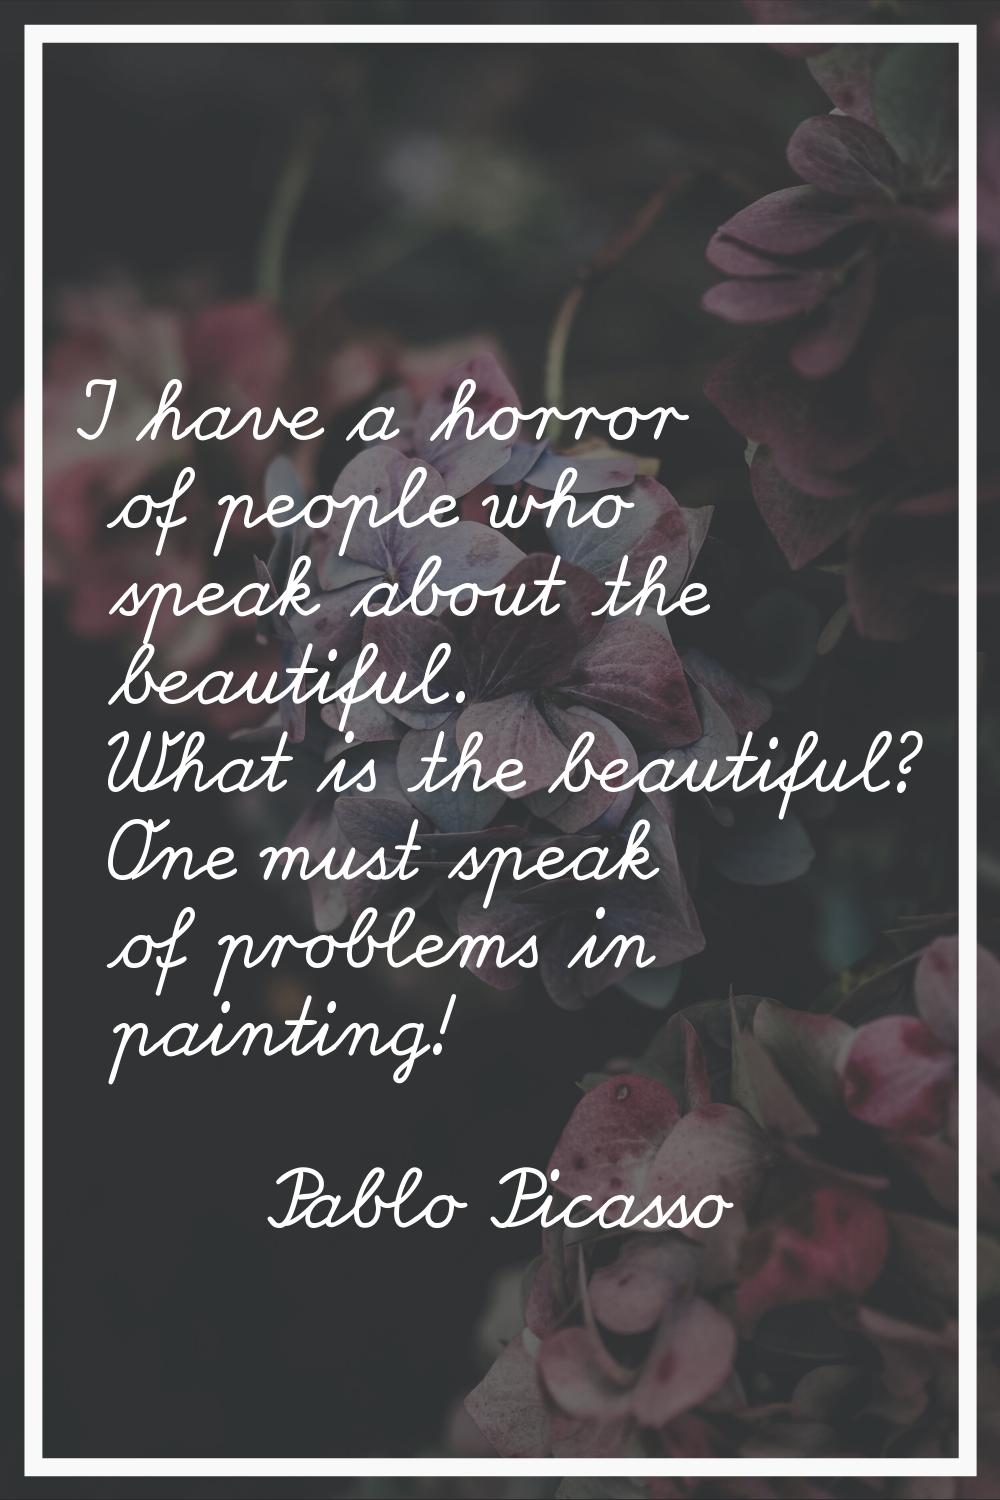 I have a horror of people who speak about the beautiful. What is the beautiful? One must speak of p